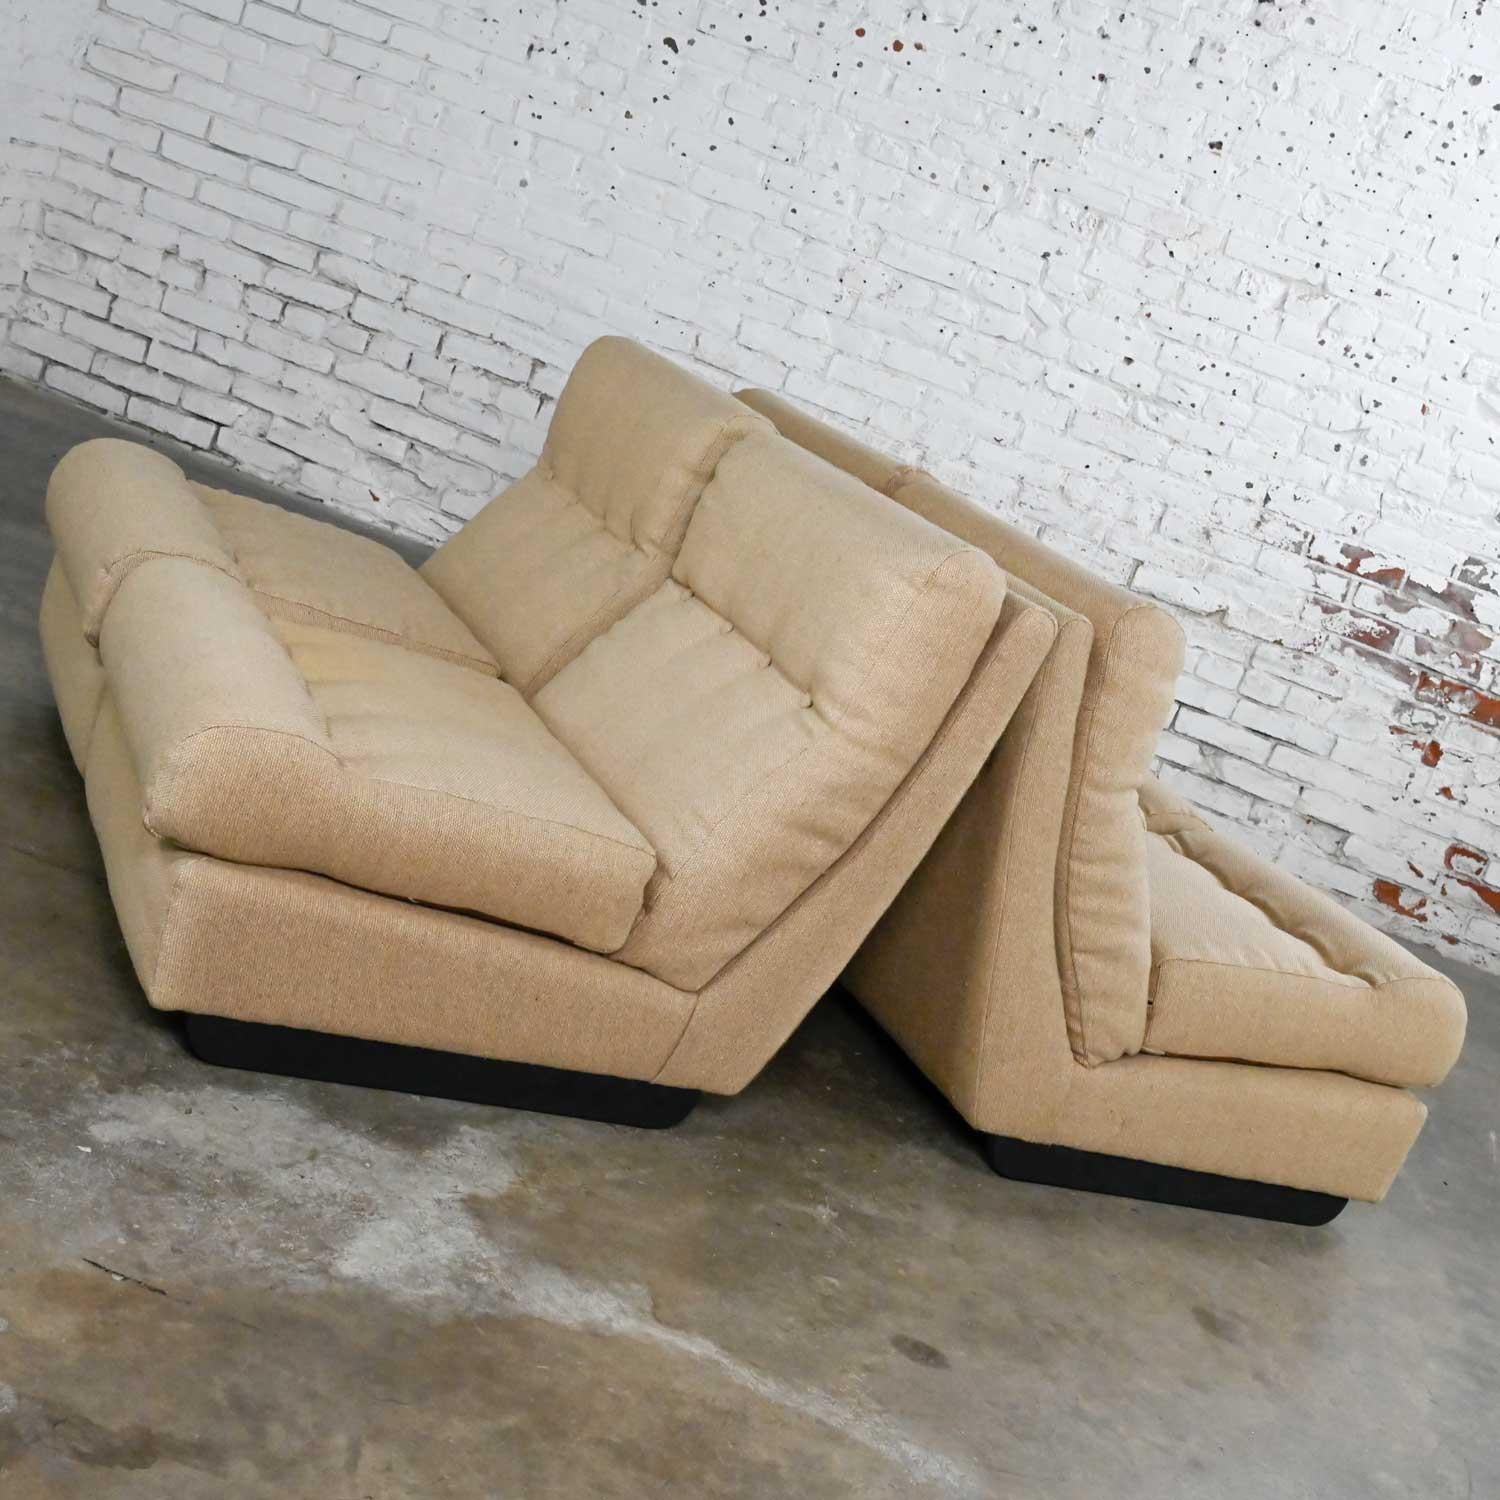 Vintage Scandinavian Modern Khaki Hopsacking 4 Piece Modular Sofa Made in Sweden In Good Condition For Sale In Topeka, KS